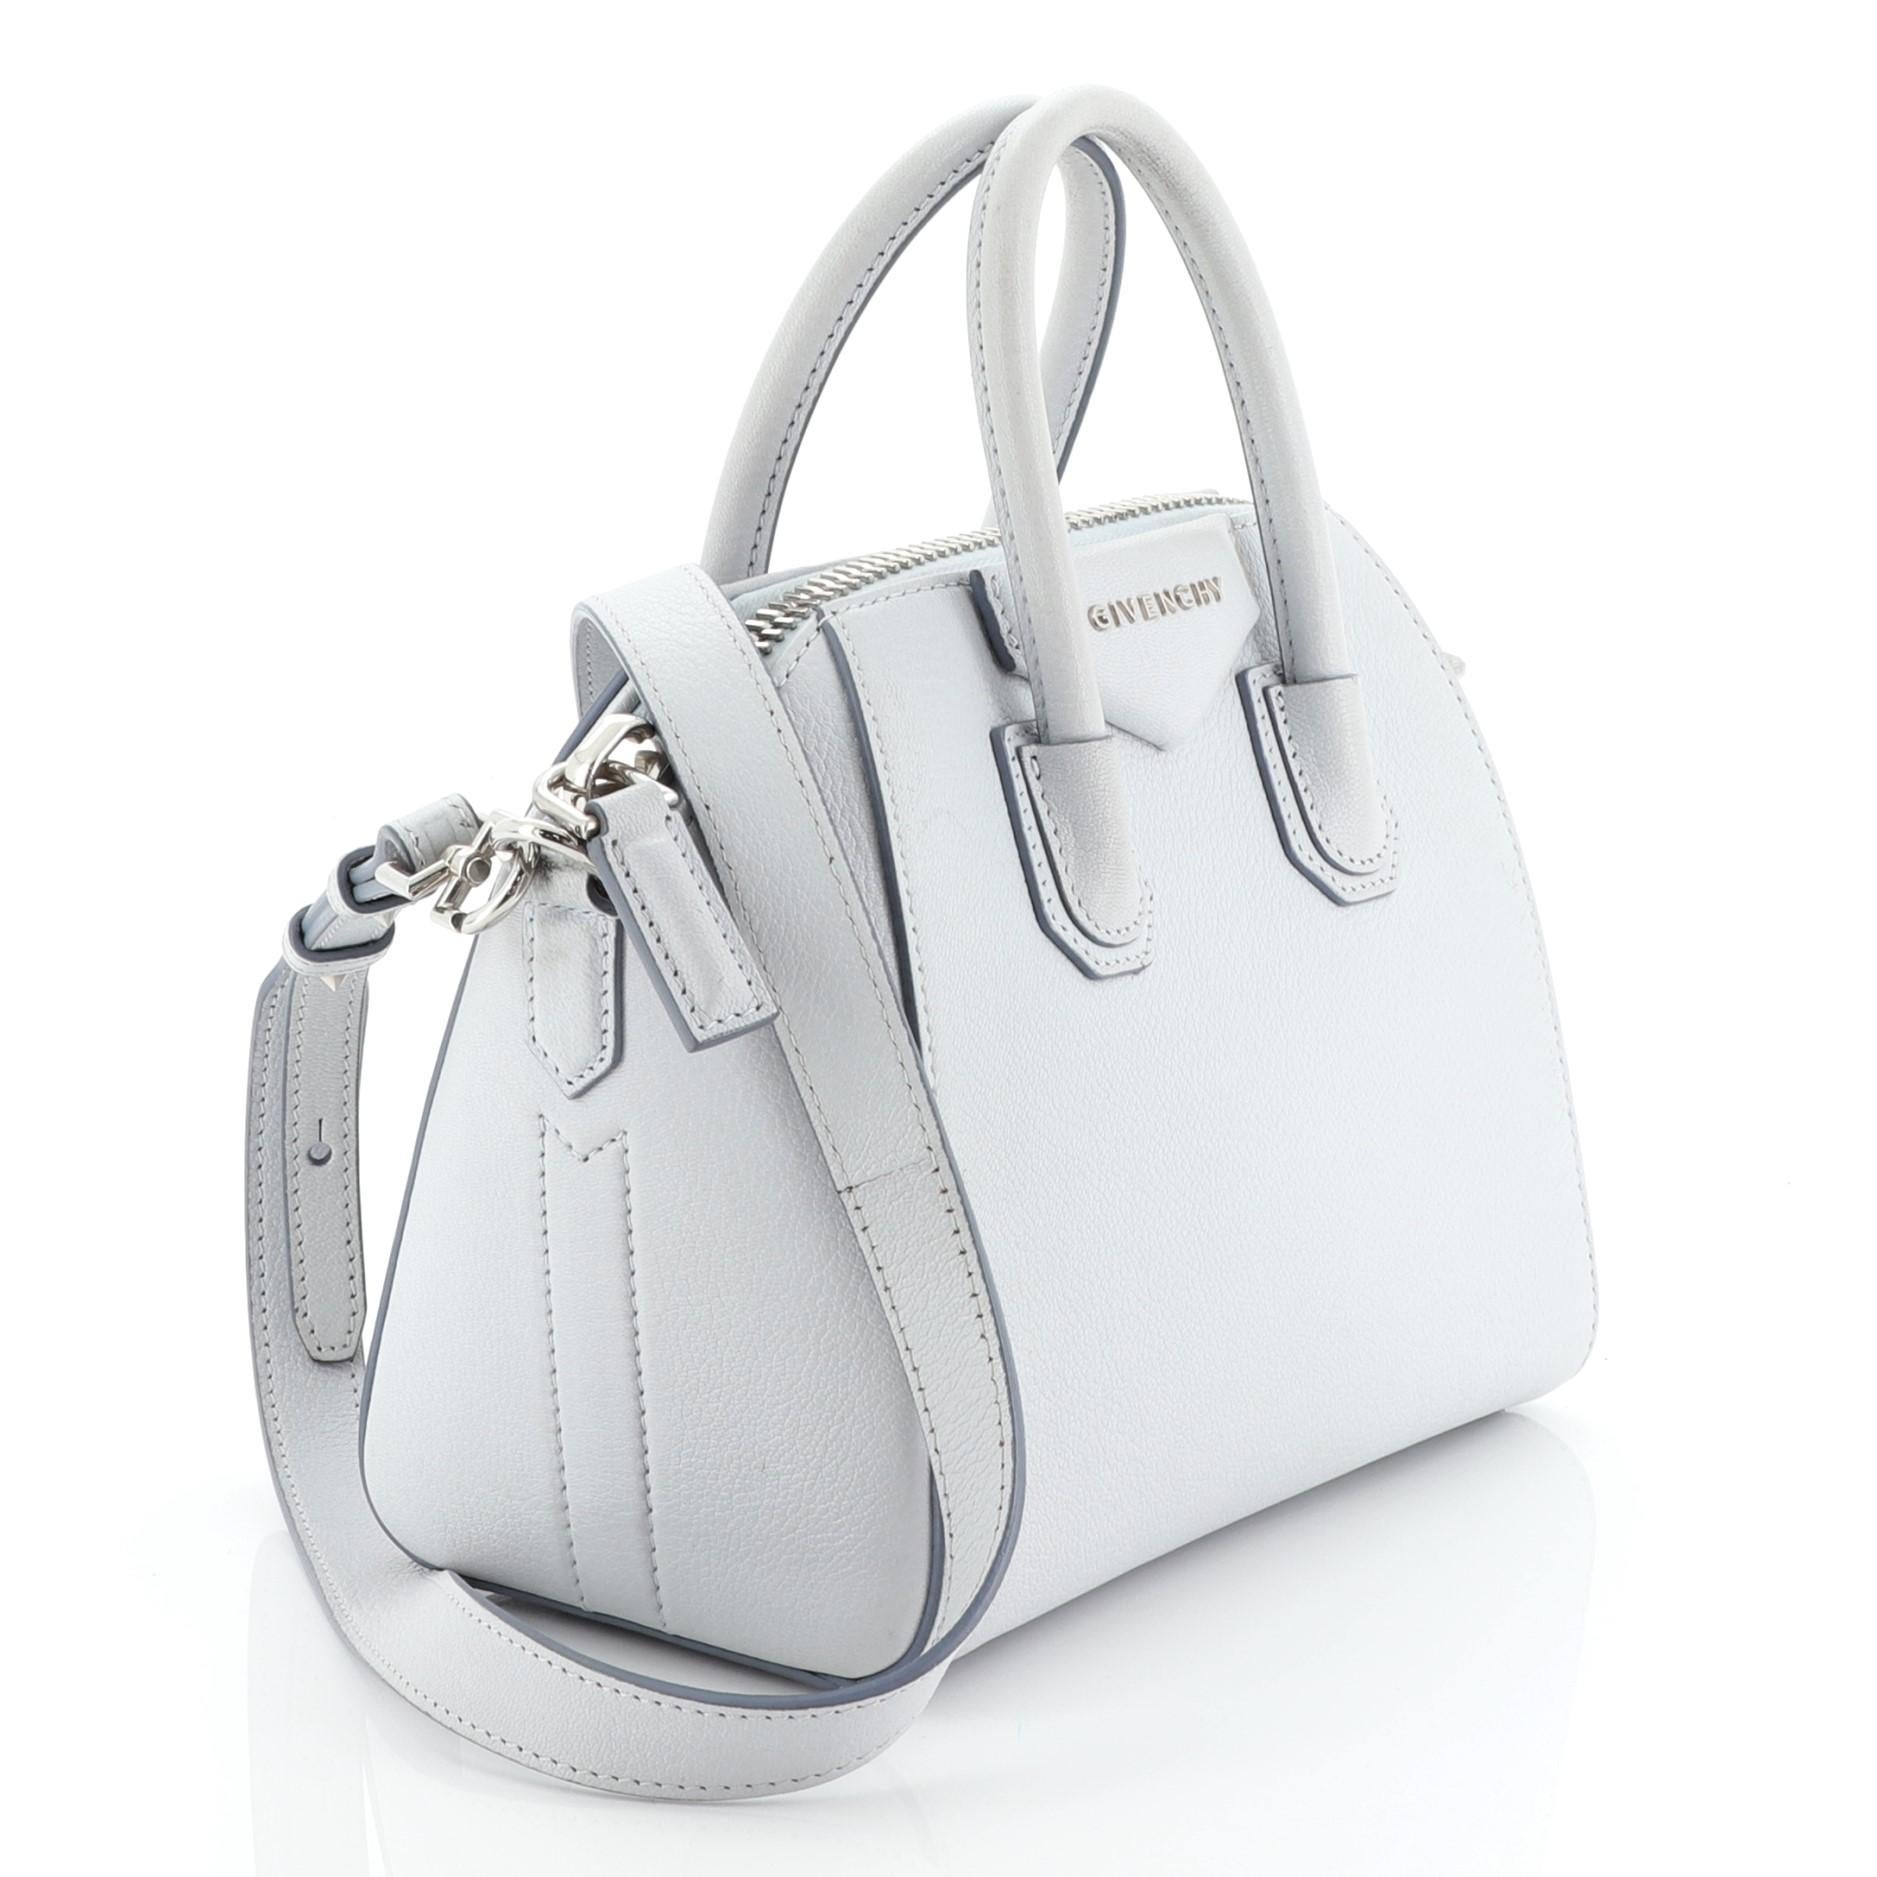 This Givenchy Antigona Bag Leather Mini, crafted from blue leather, features dual rolled leather handles and silver-tone hardware. Its zip closure opens to a neutral fabric interior with zip and slip pockets.

Estimated Retail Price: